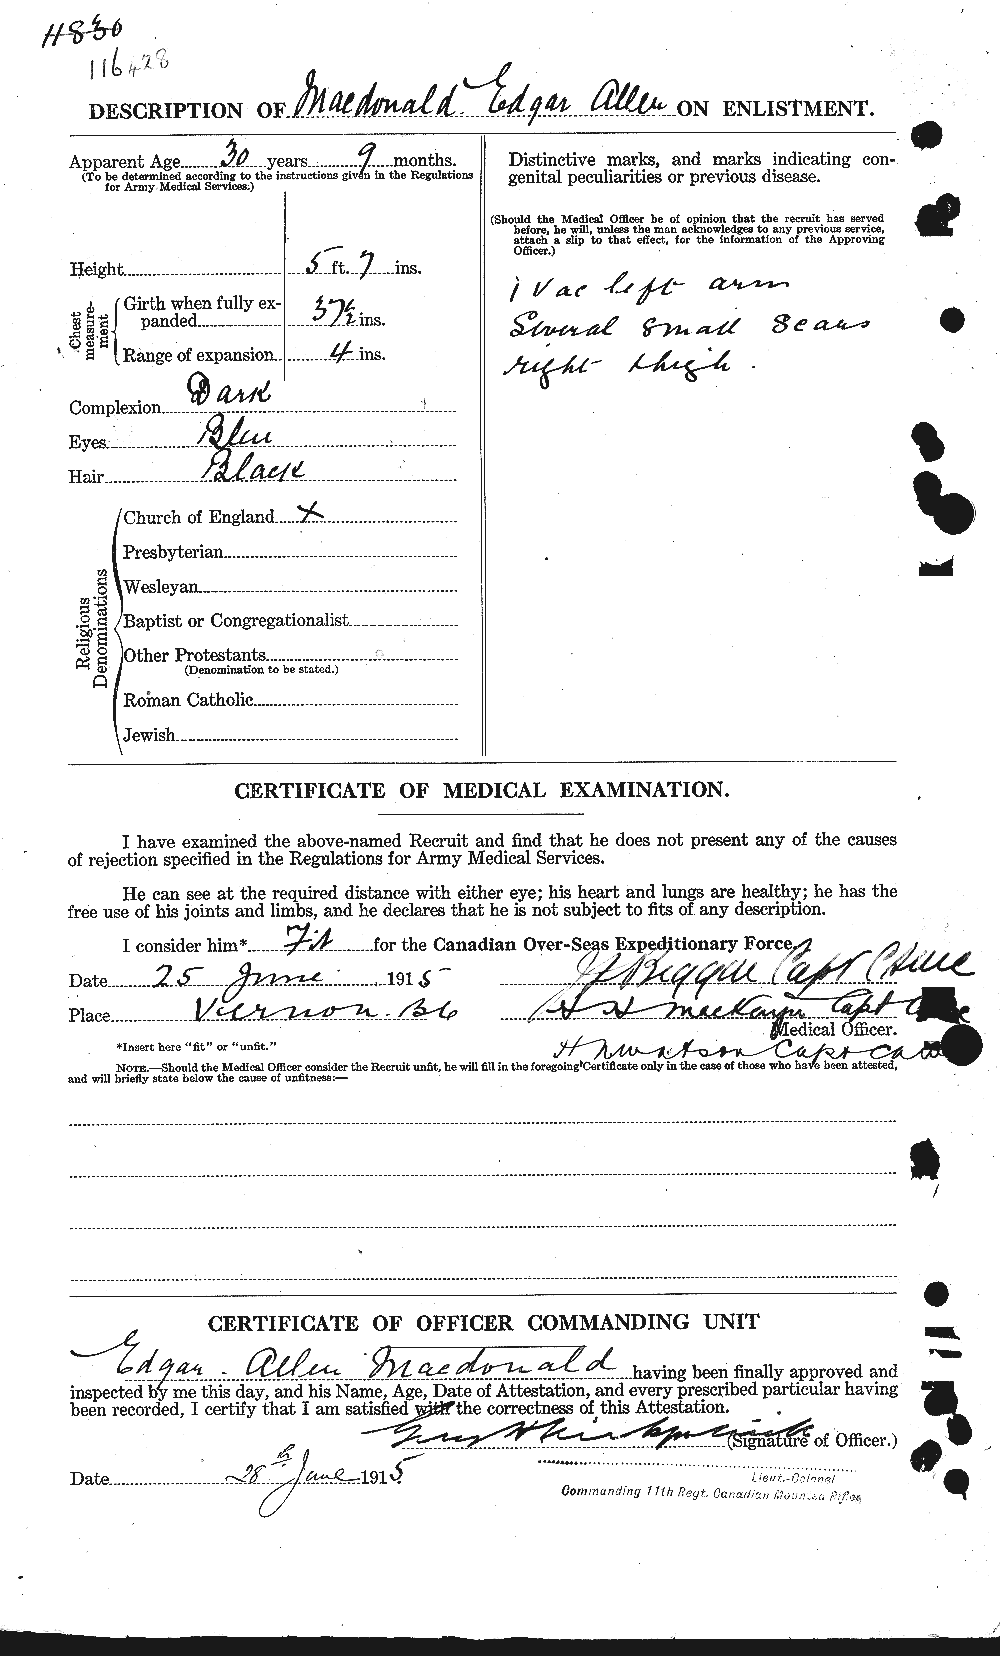 Personnel Records of the First World War - CEF 517253b